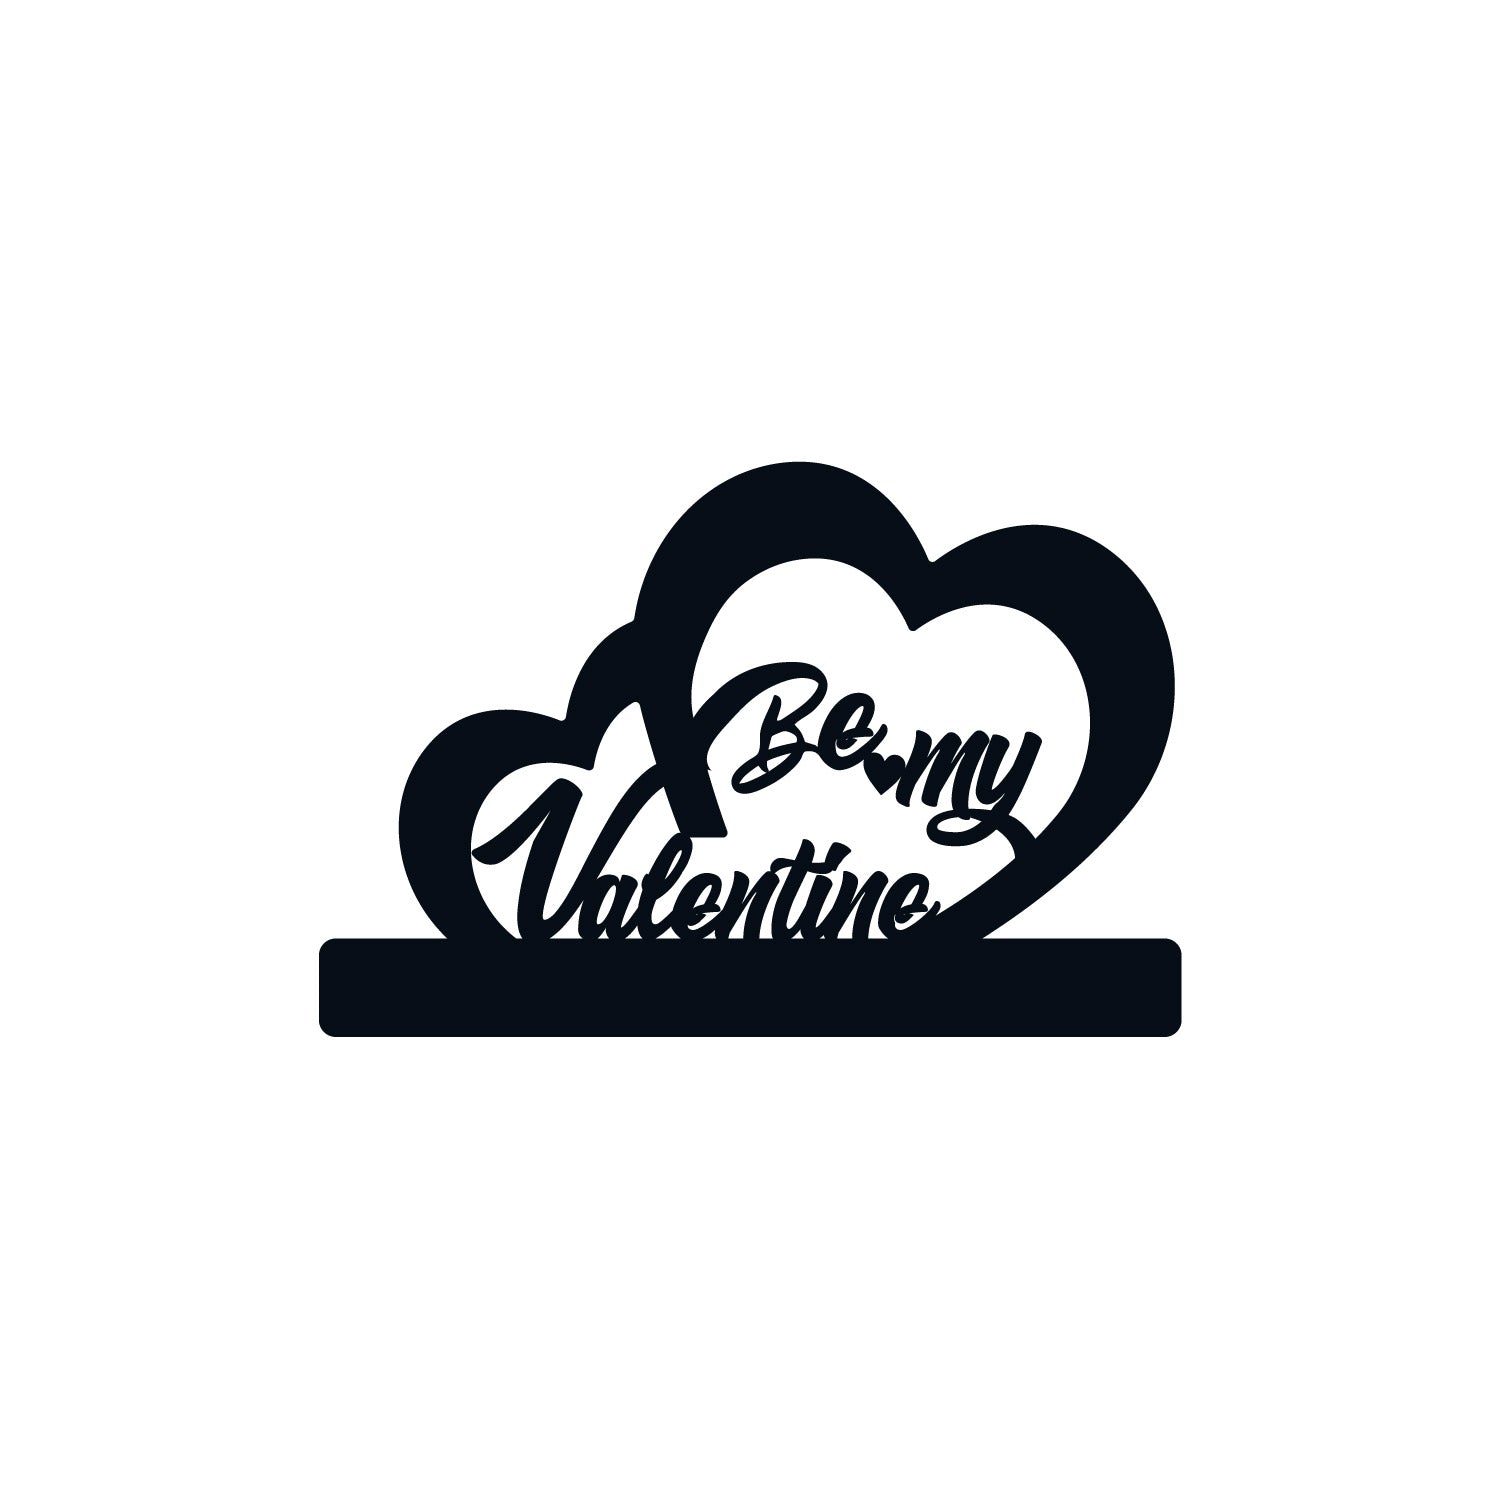 "Be My Valentine" Black Engineered Wood Wall Art Cutout, Ready to Hang Home Decor 2